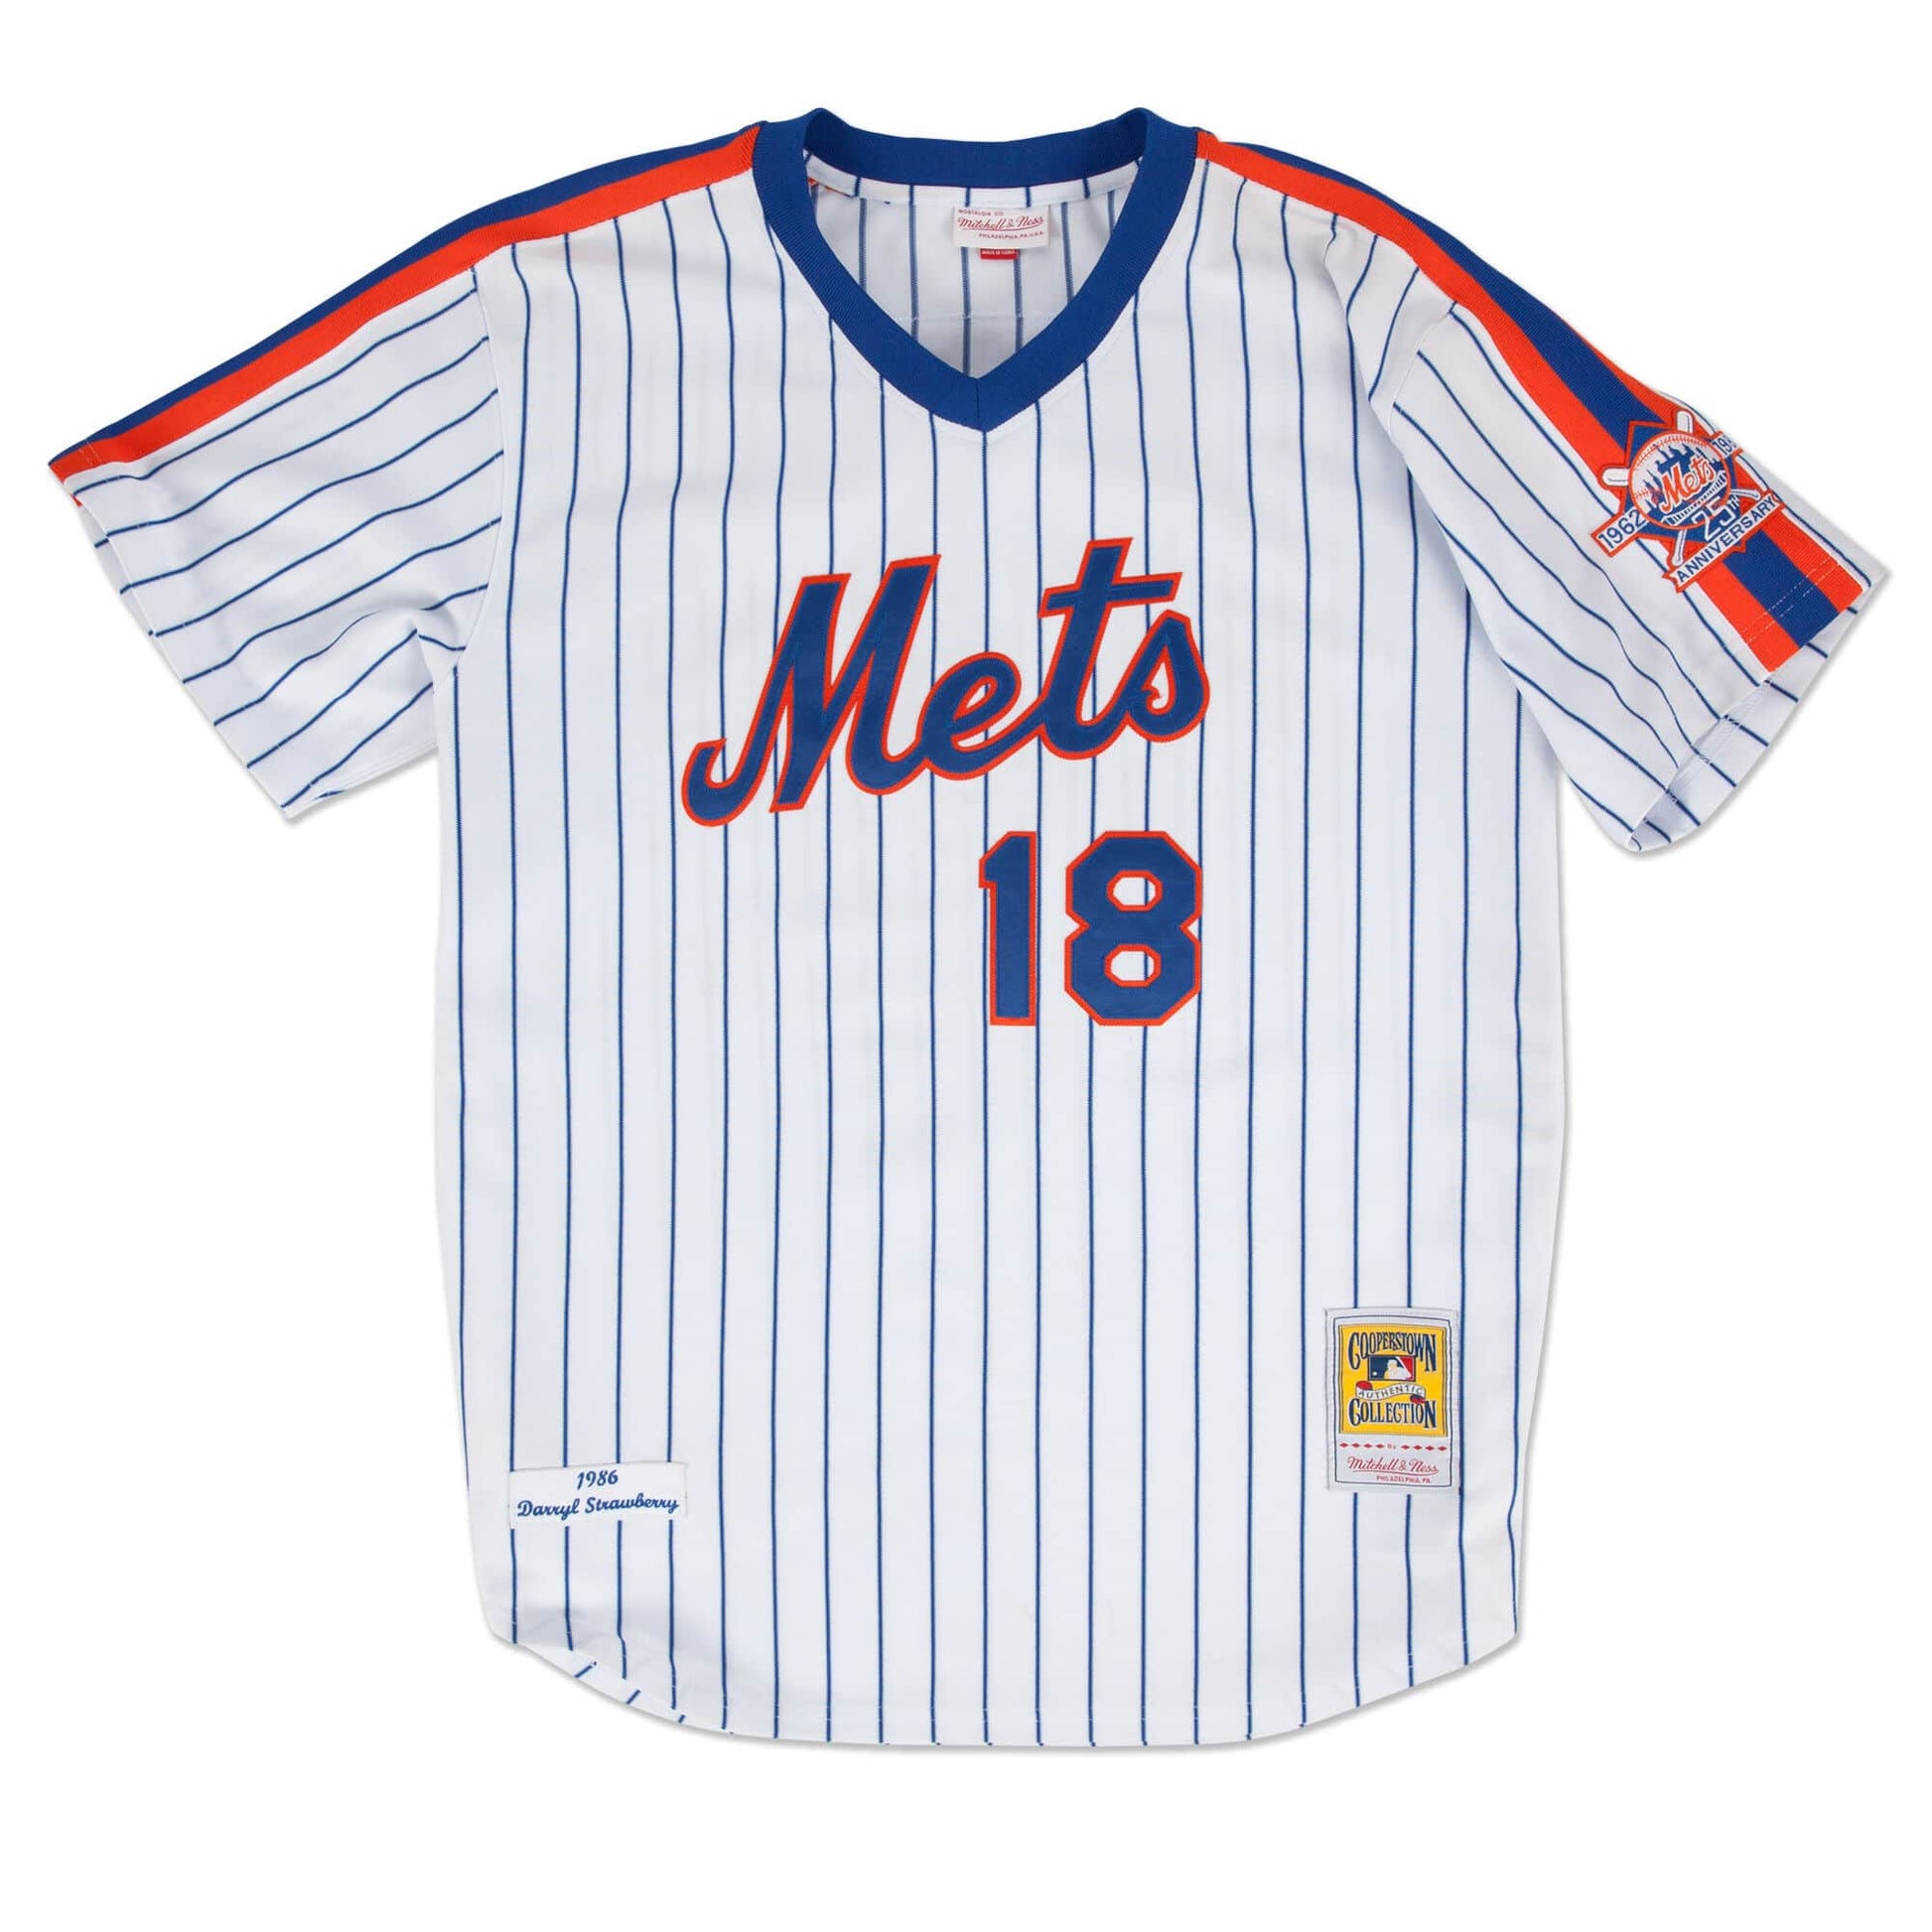 New York Mets 1986 Throwback Complete Game-Used Uniform Set